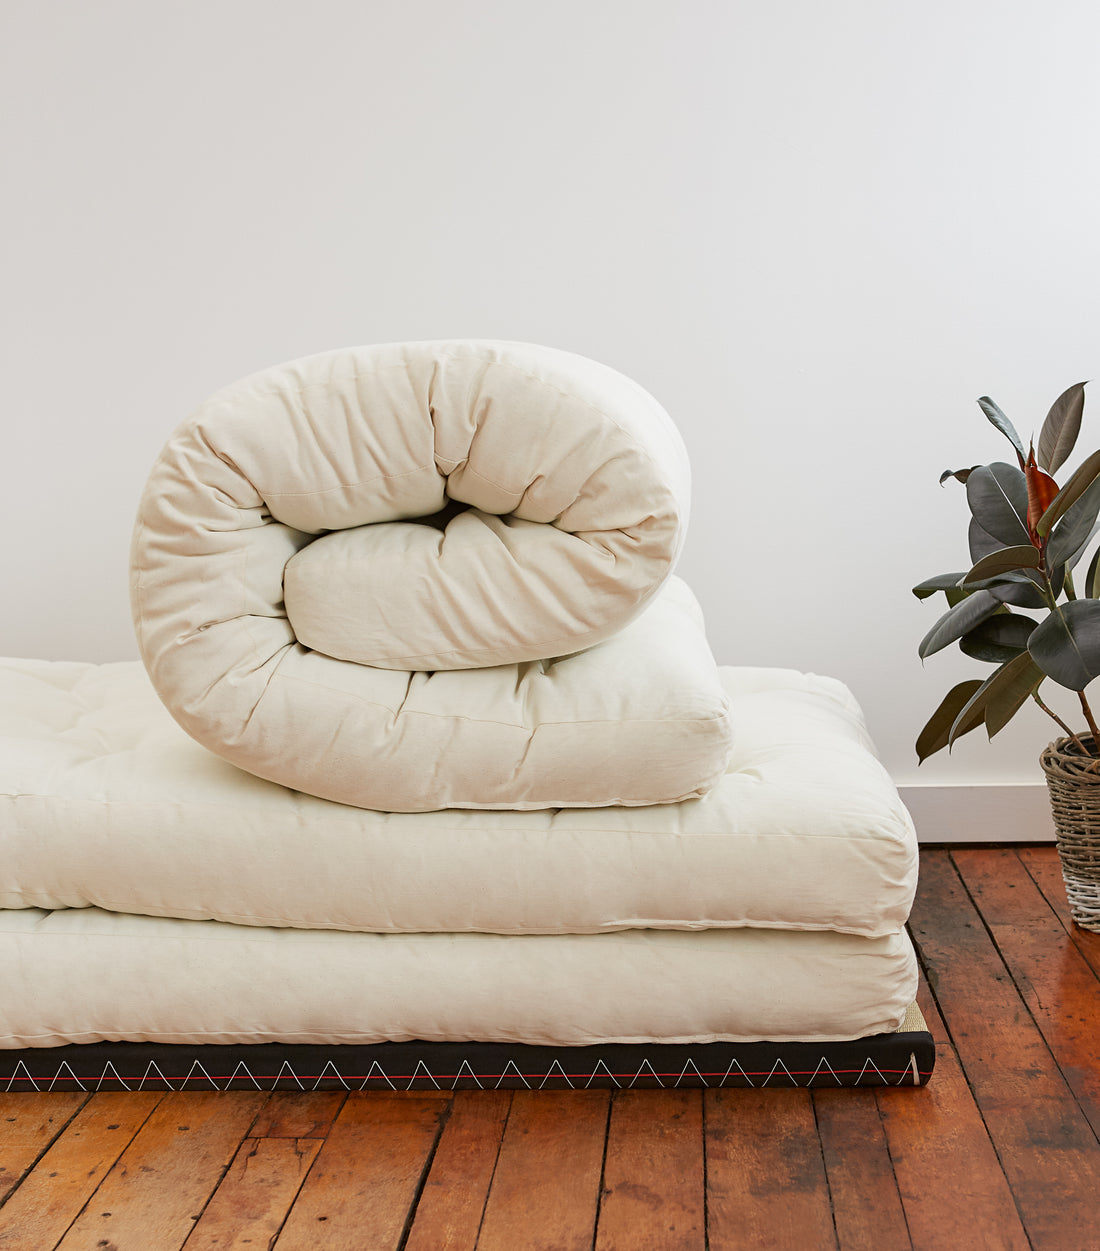 The Complete Futon Mattress Buying Guide